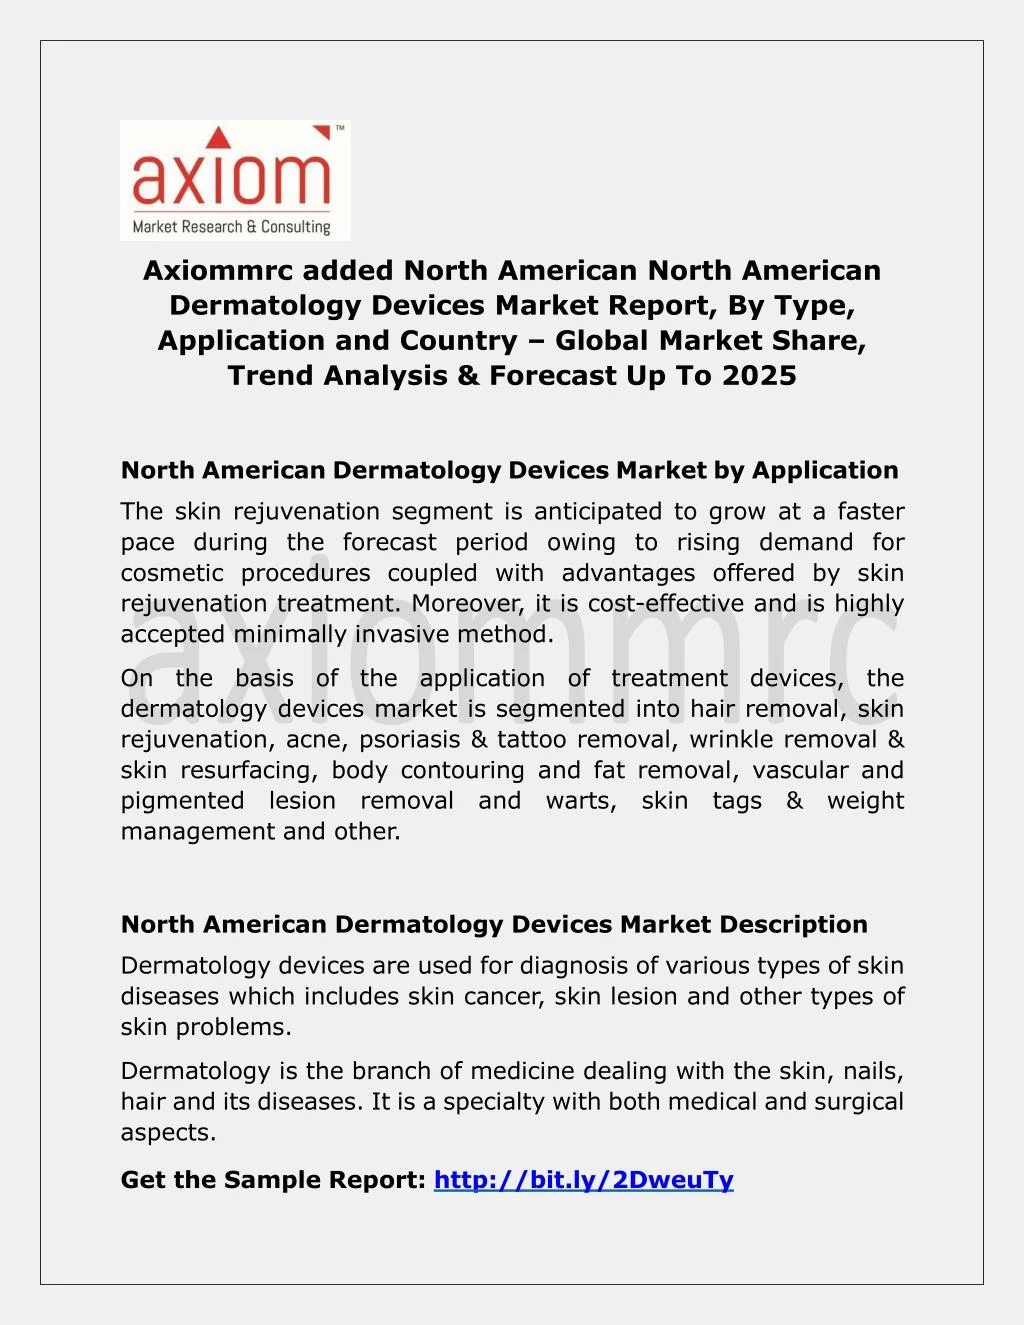 axiommrc added north american north american